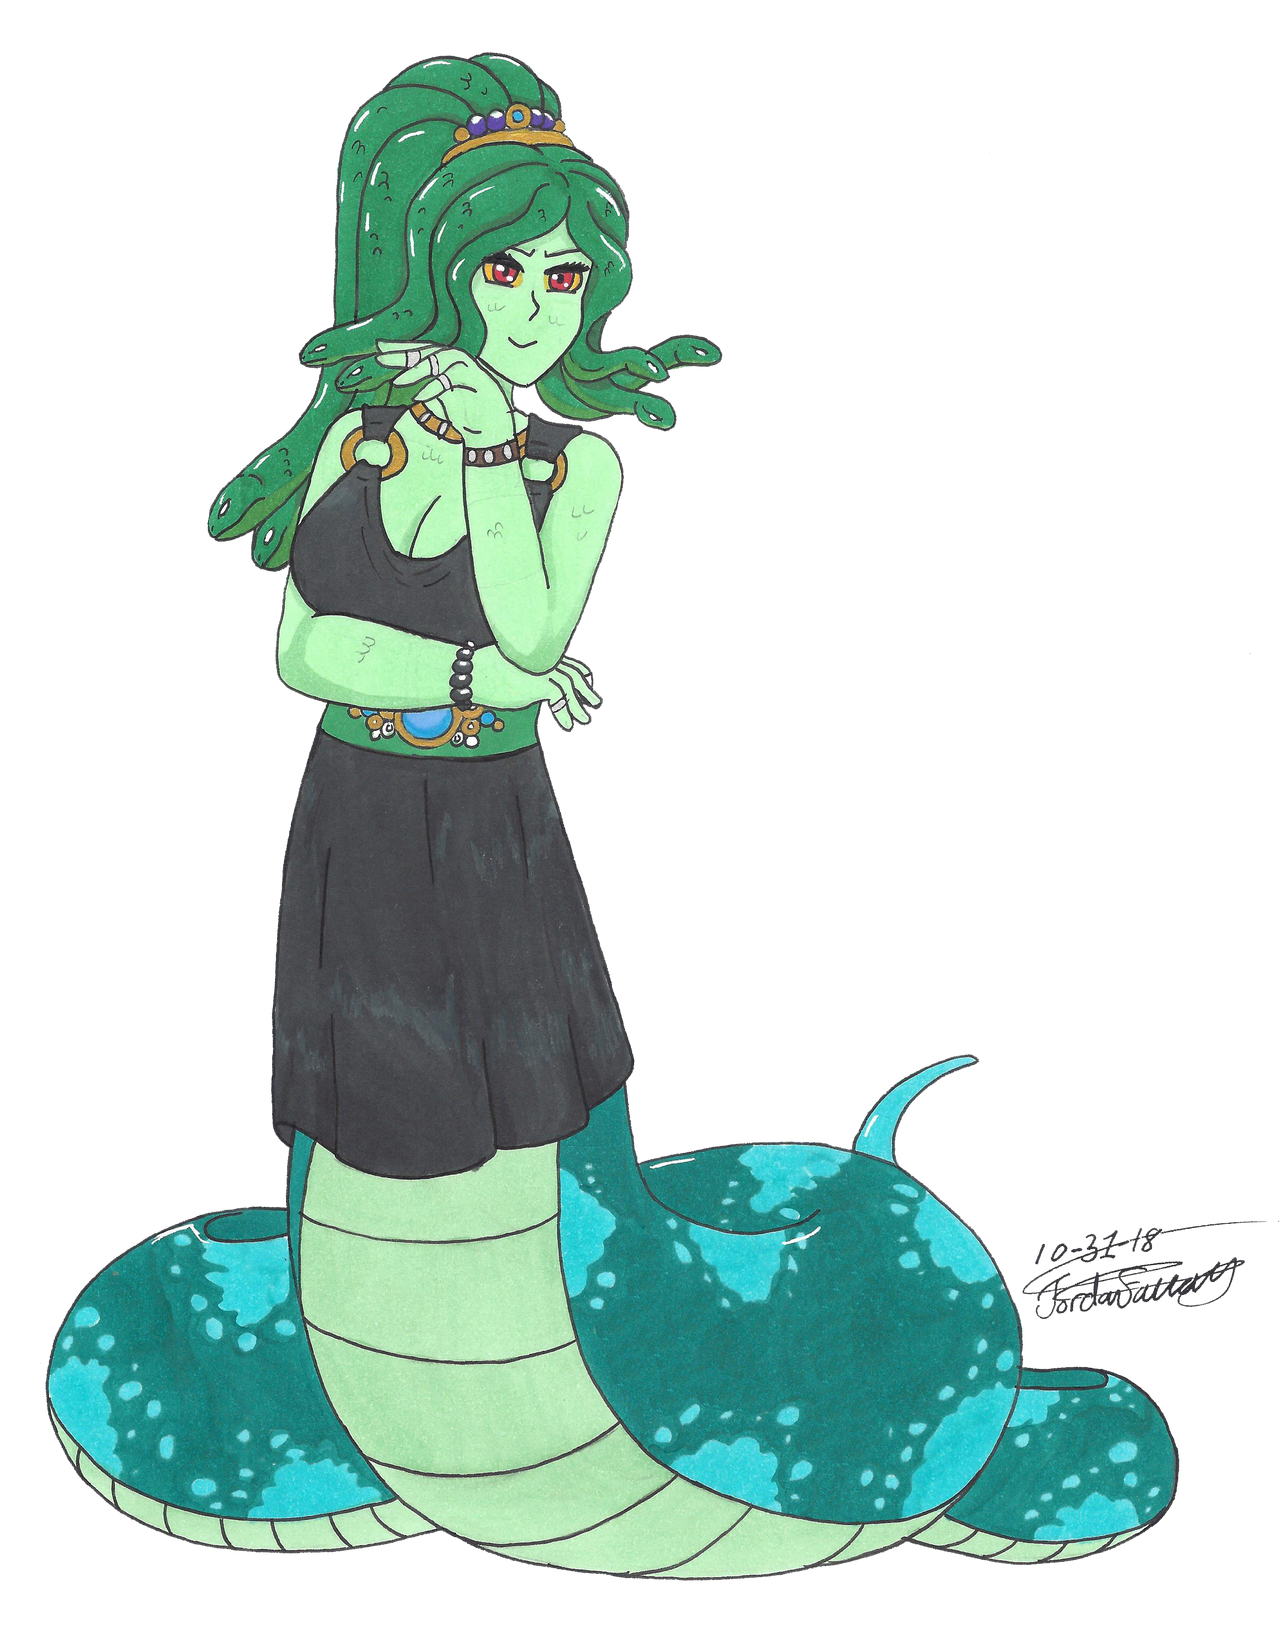 Gorgon by clinclang on DeviantArt